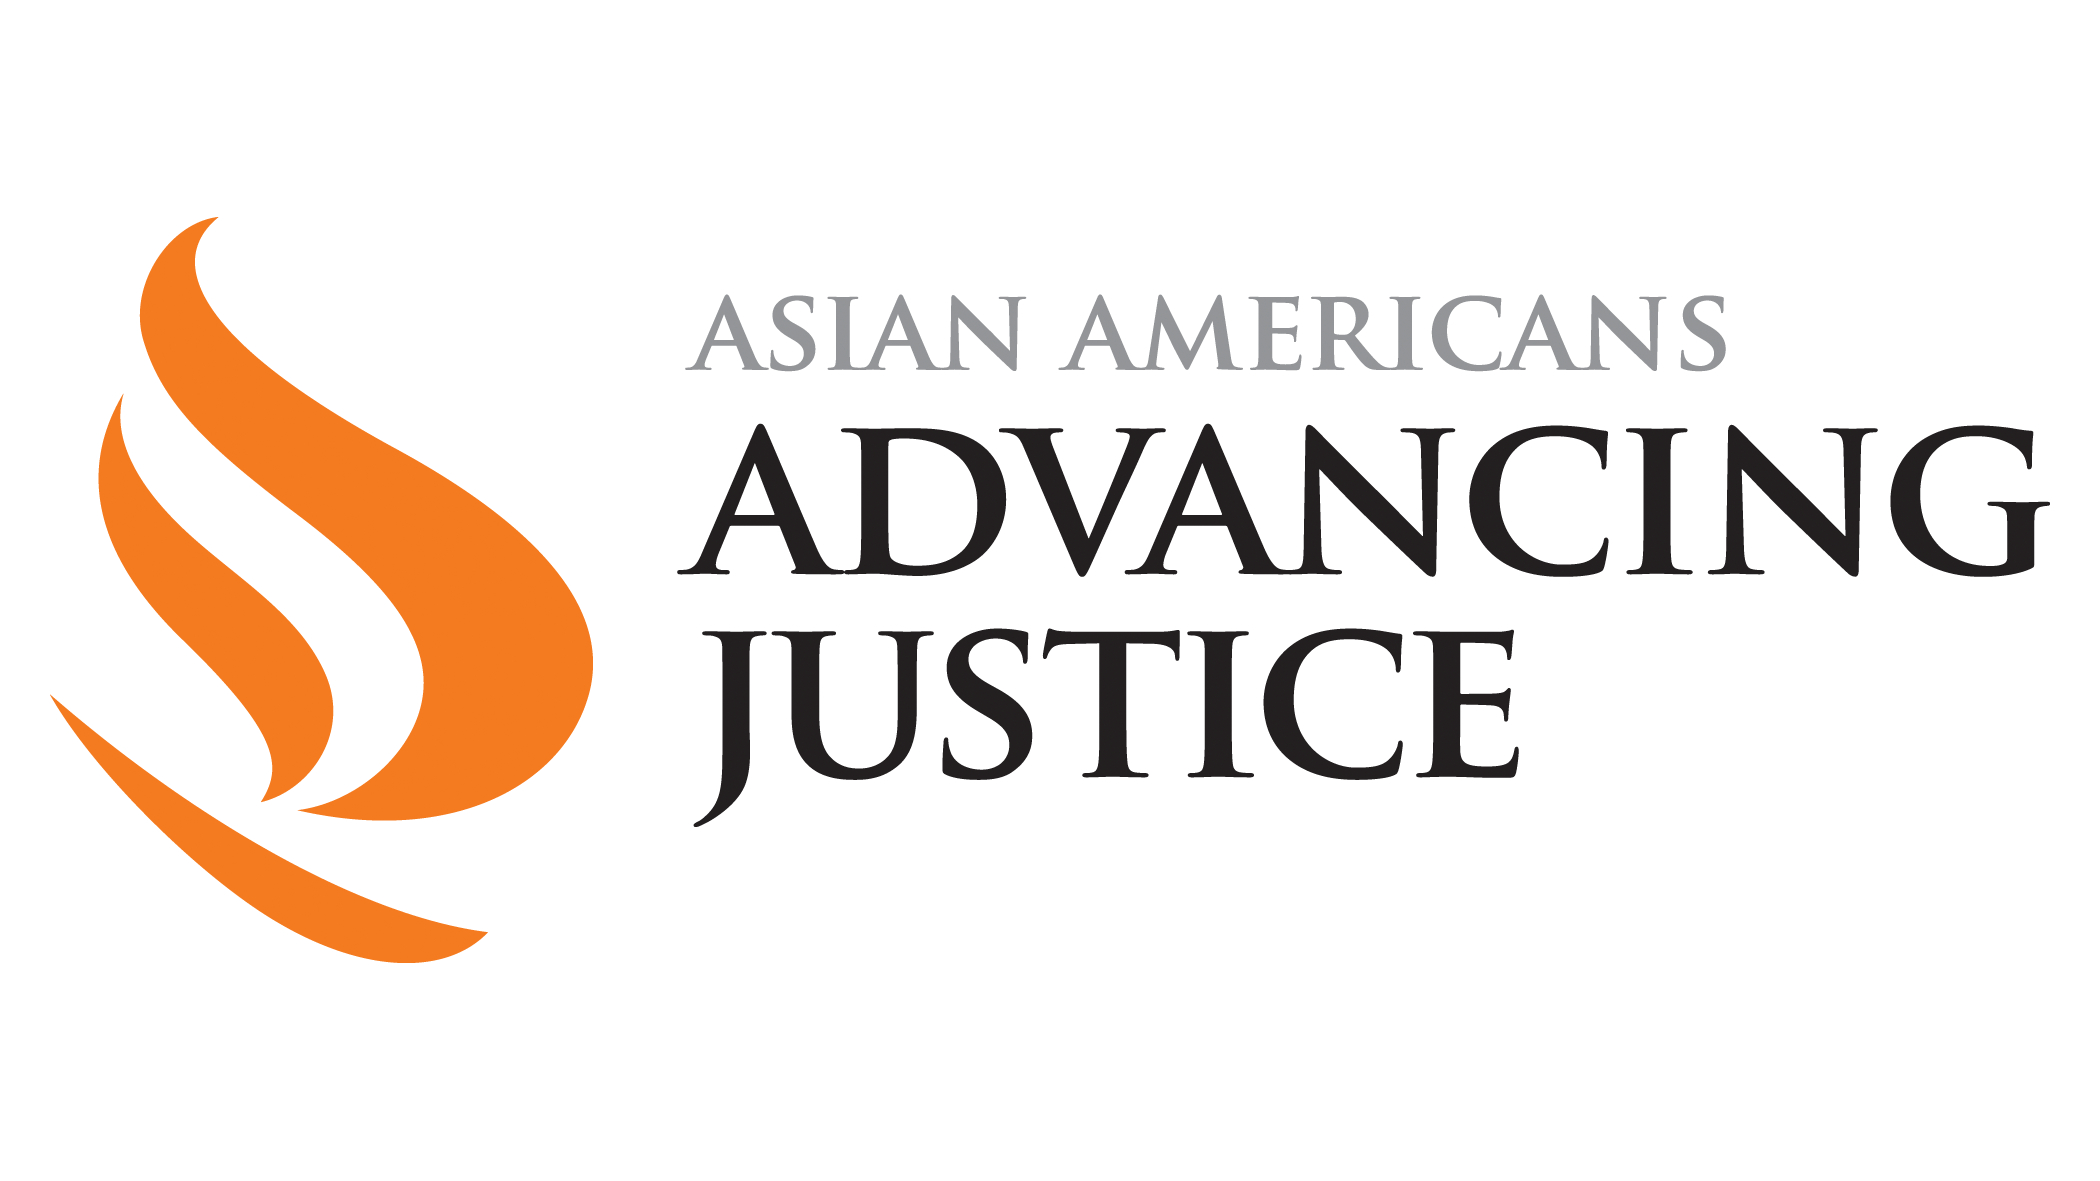 Asian Americans Advancing Justice - AAJC Inc logo